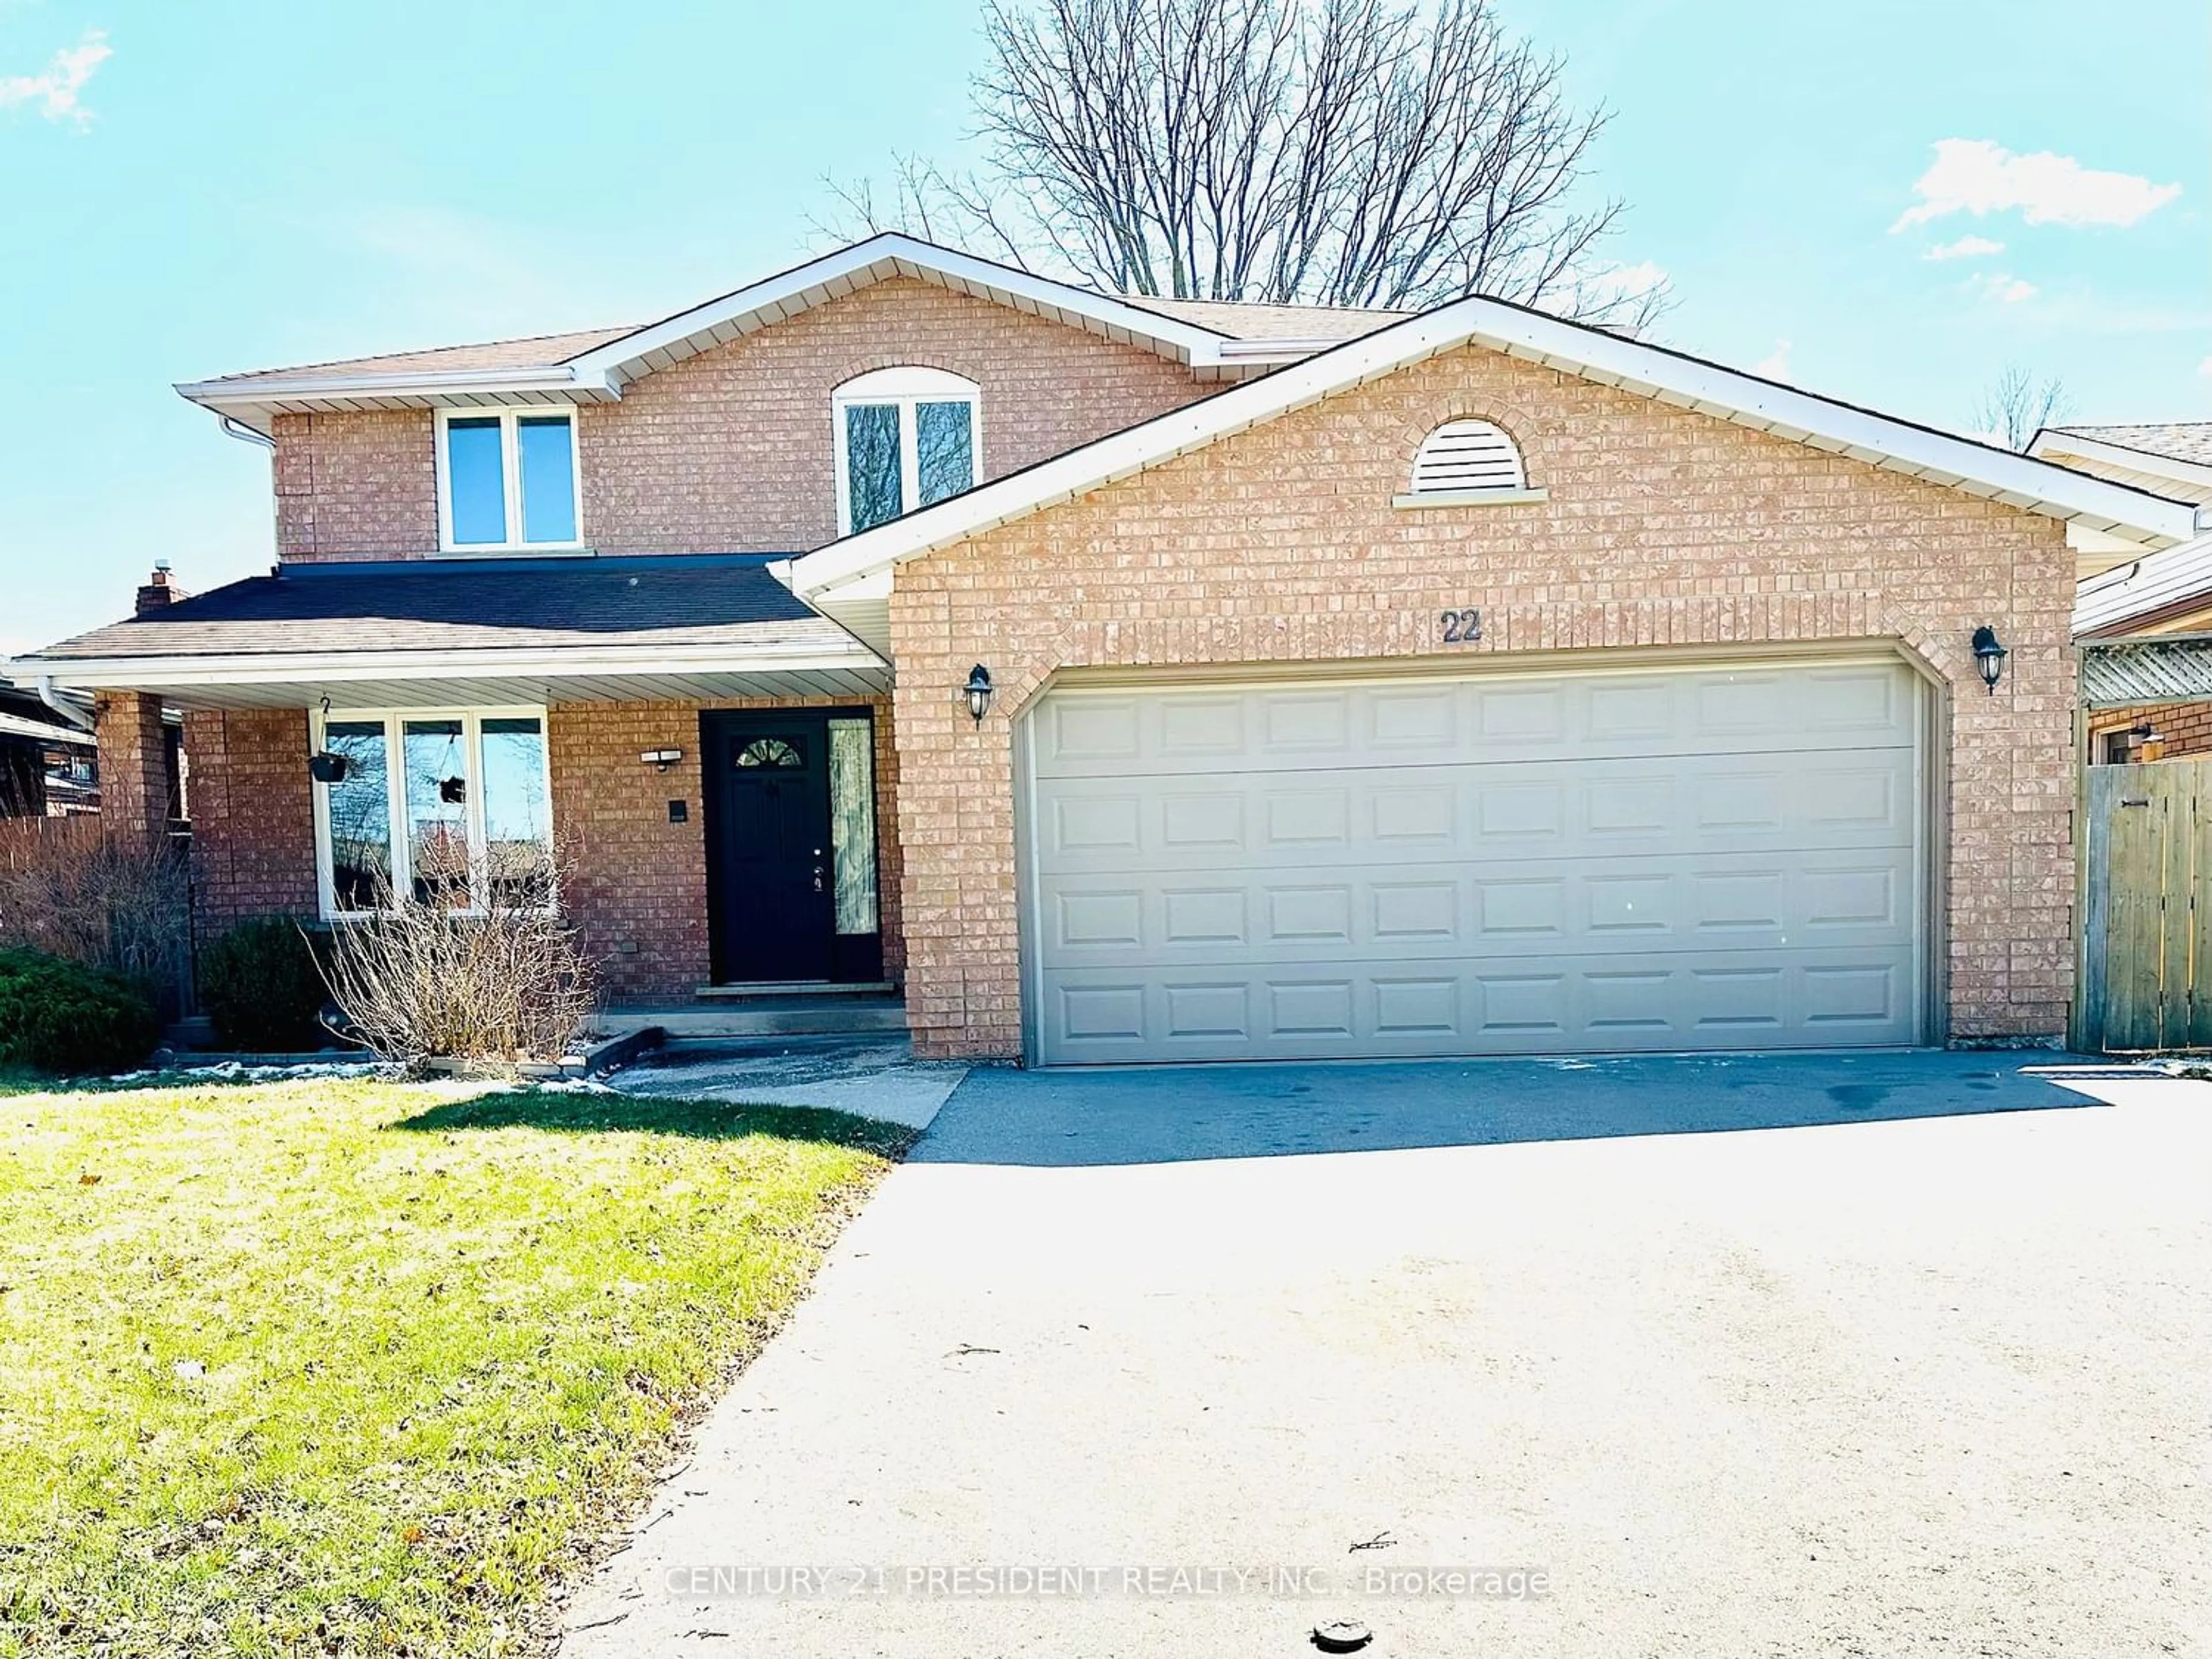 Home with brick exterior material for 22 Royal Oak Dr, Brantford Ontario N3R 7P3